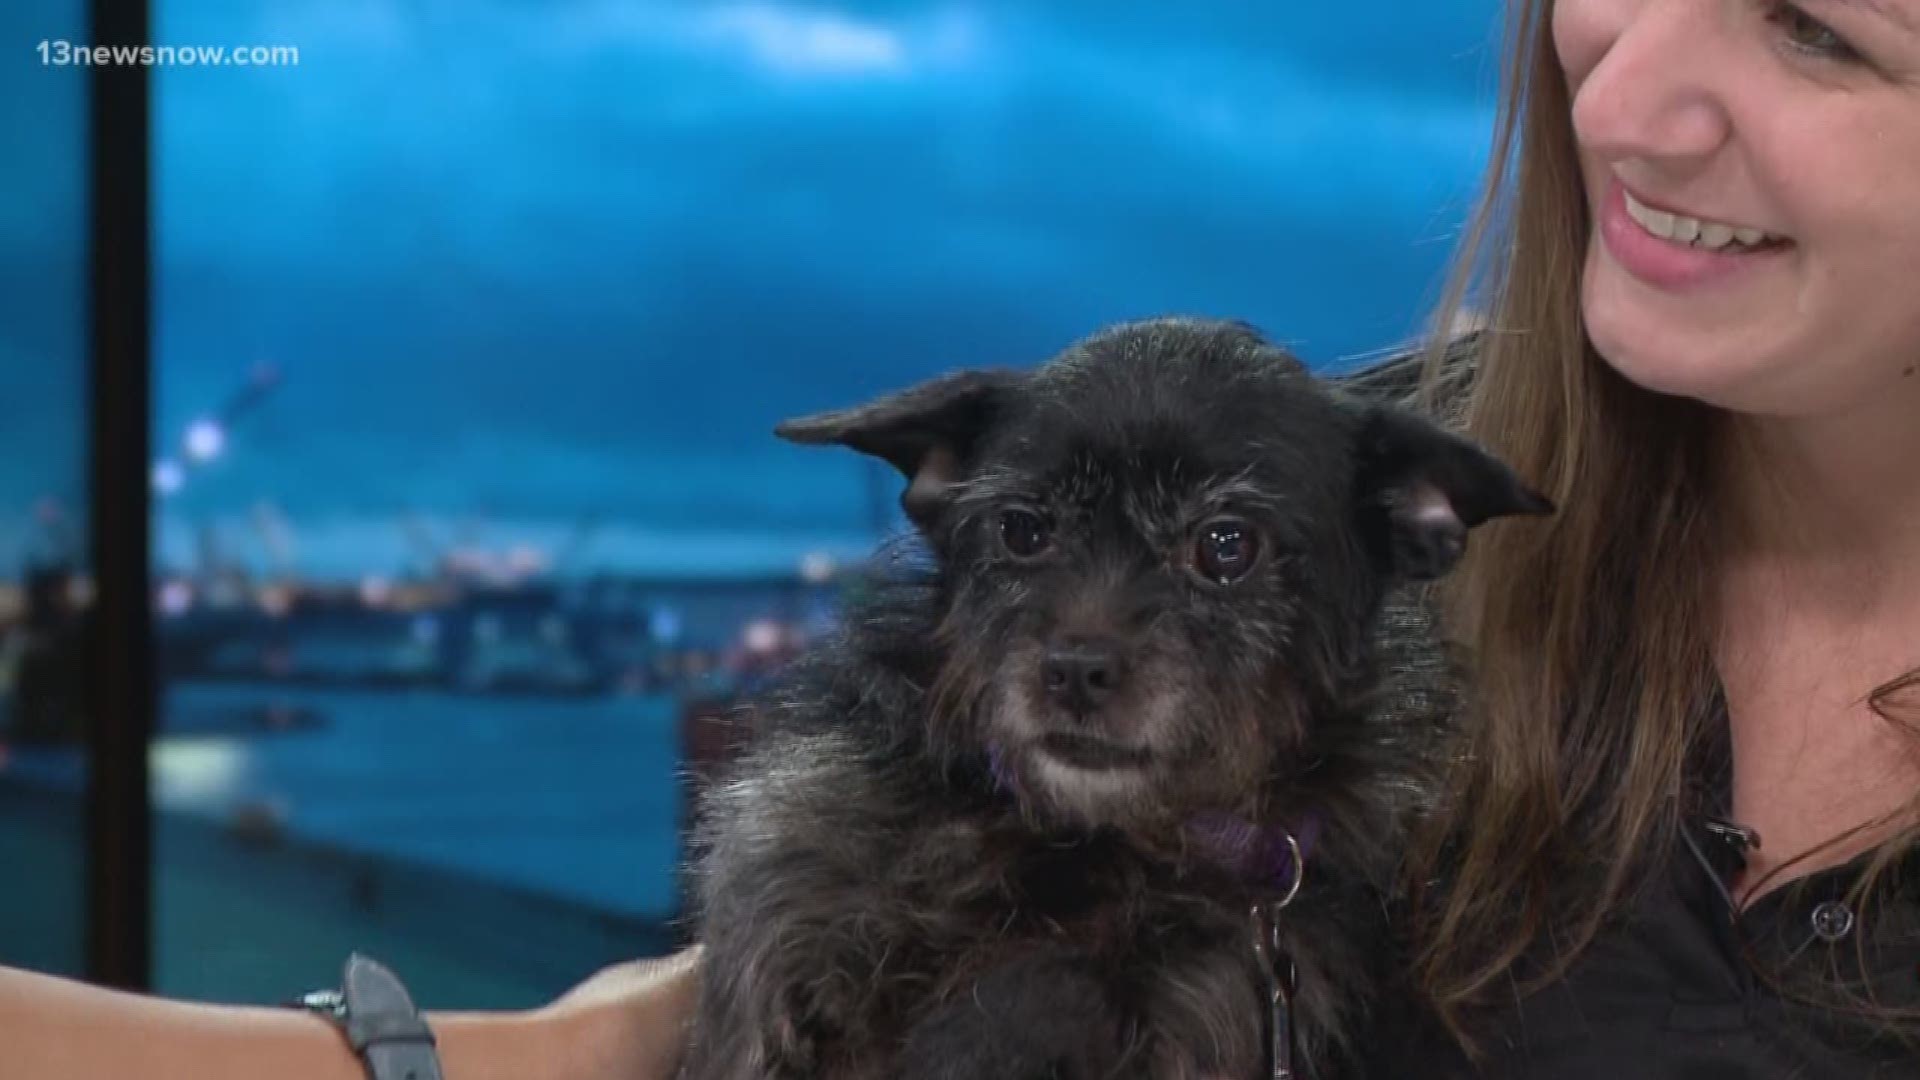 Mia comes from 4 Paws Animal Rescue. She's a terrier mix and is around 7 years old. She's looking for a forever home in time for the holidays.